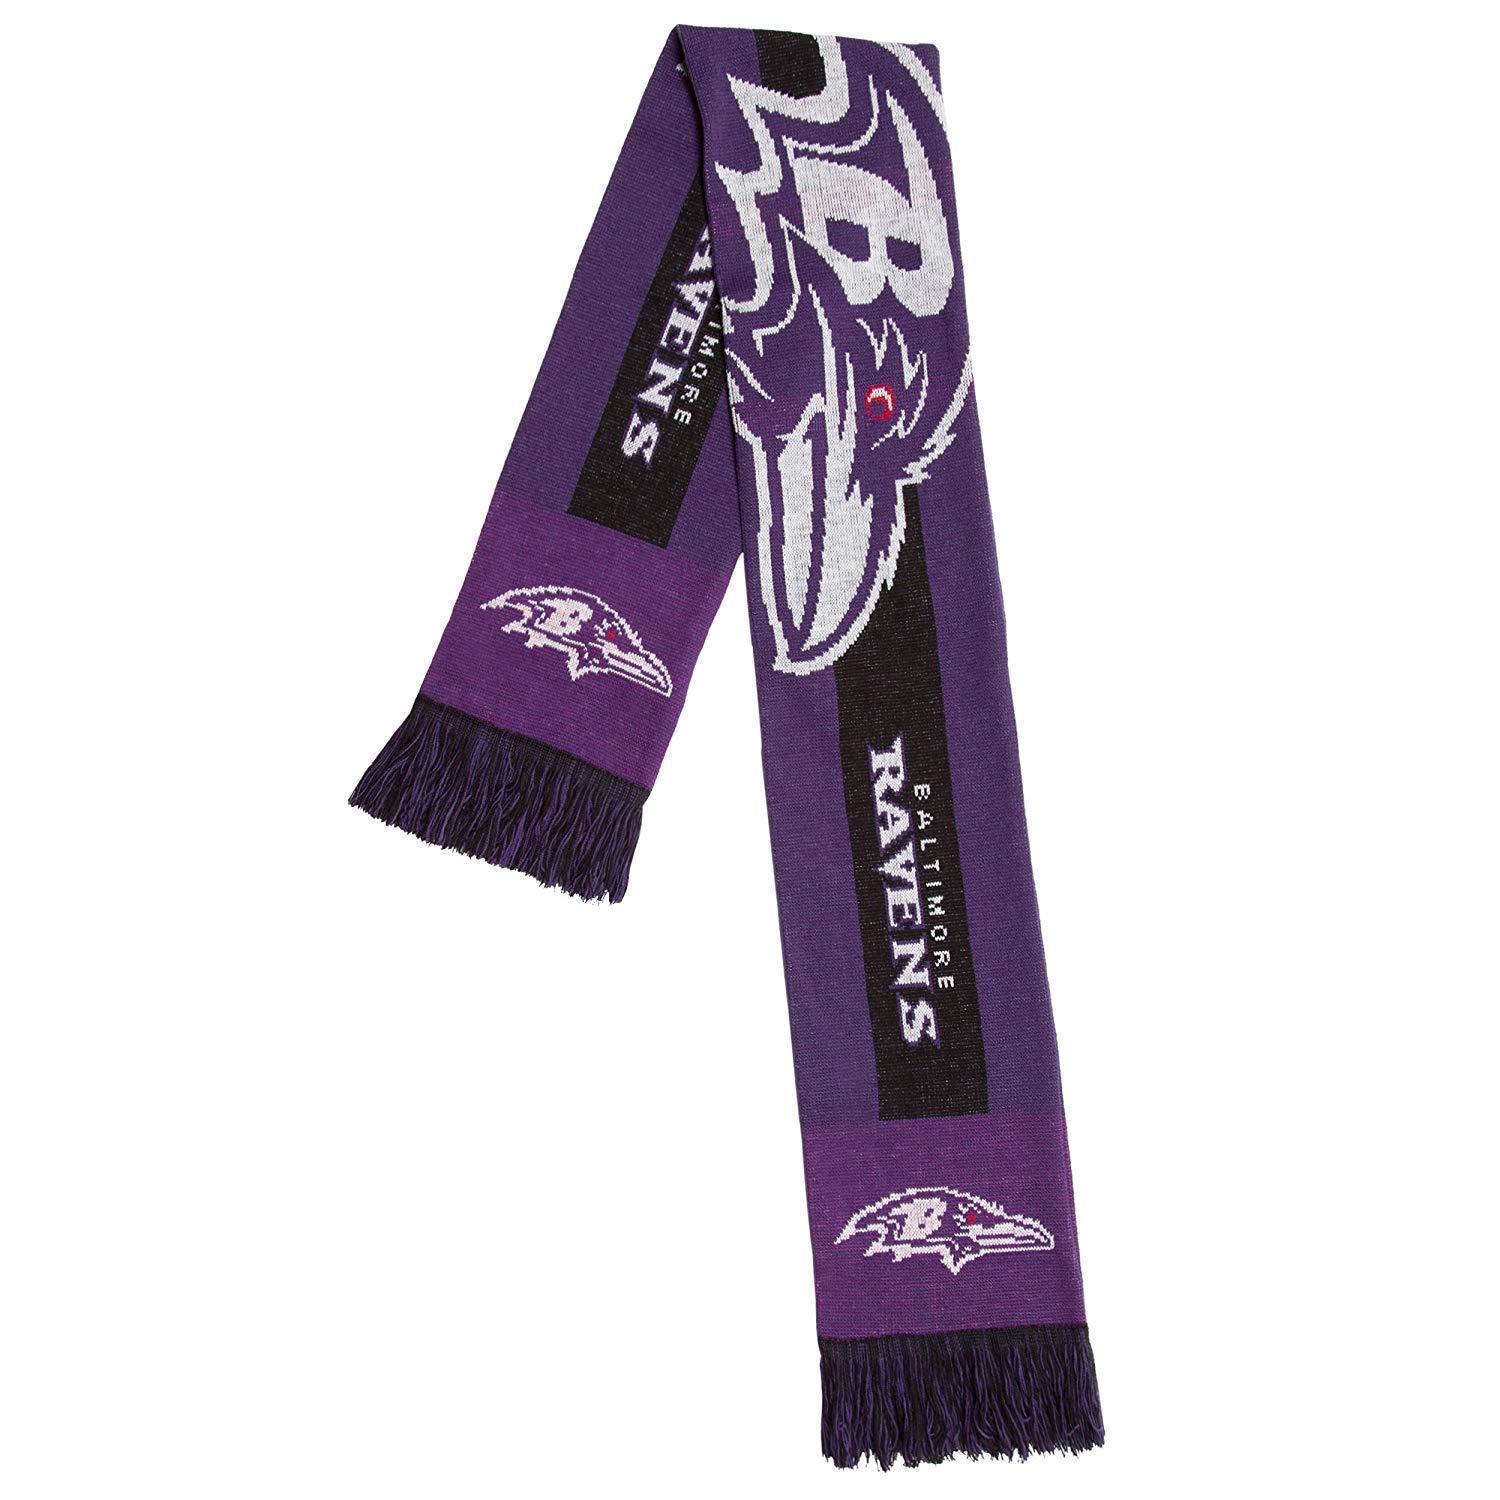 Primary image for NFL Baltimore Ravens 2016 Big Logo Scarf 64"x6" by Forever Collectibles